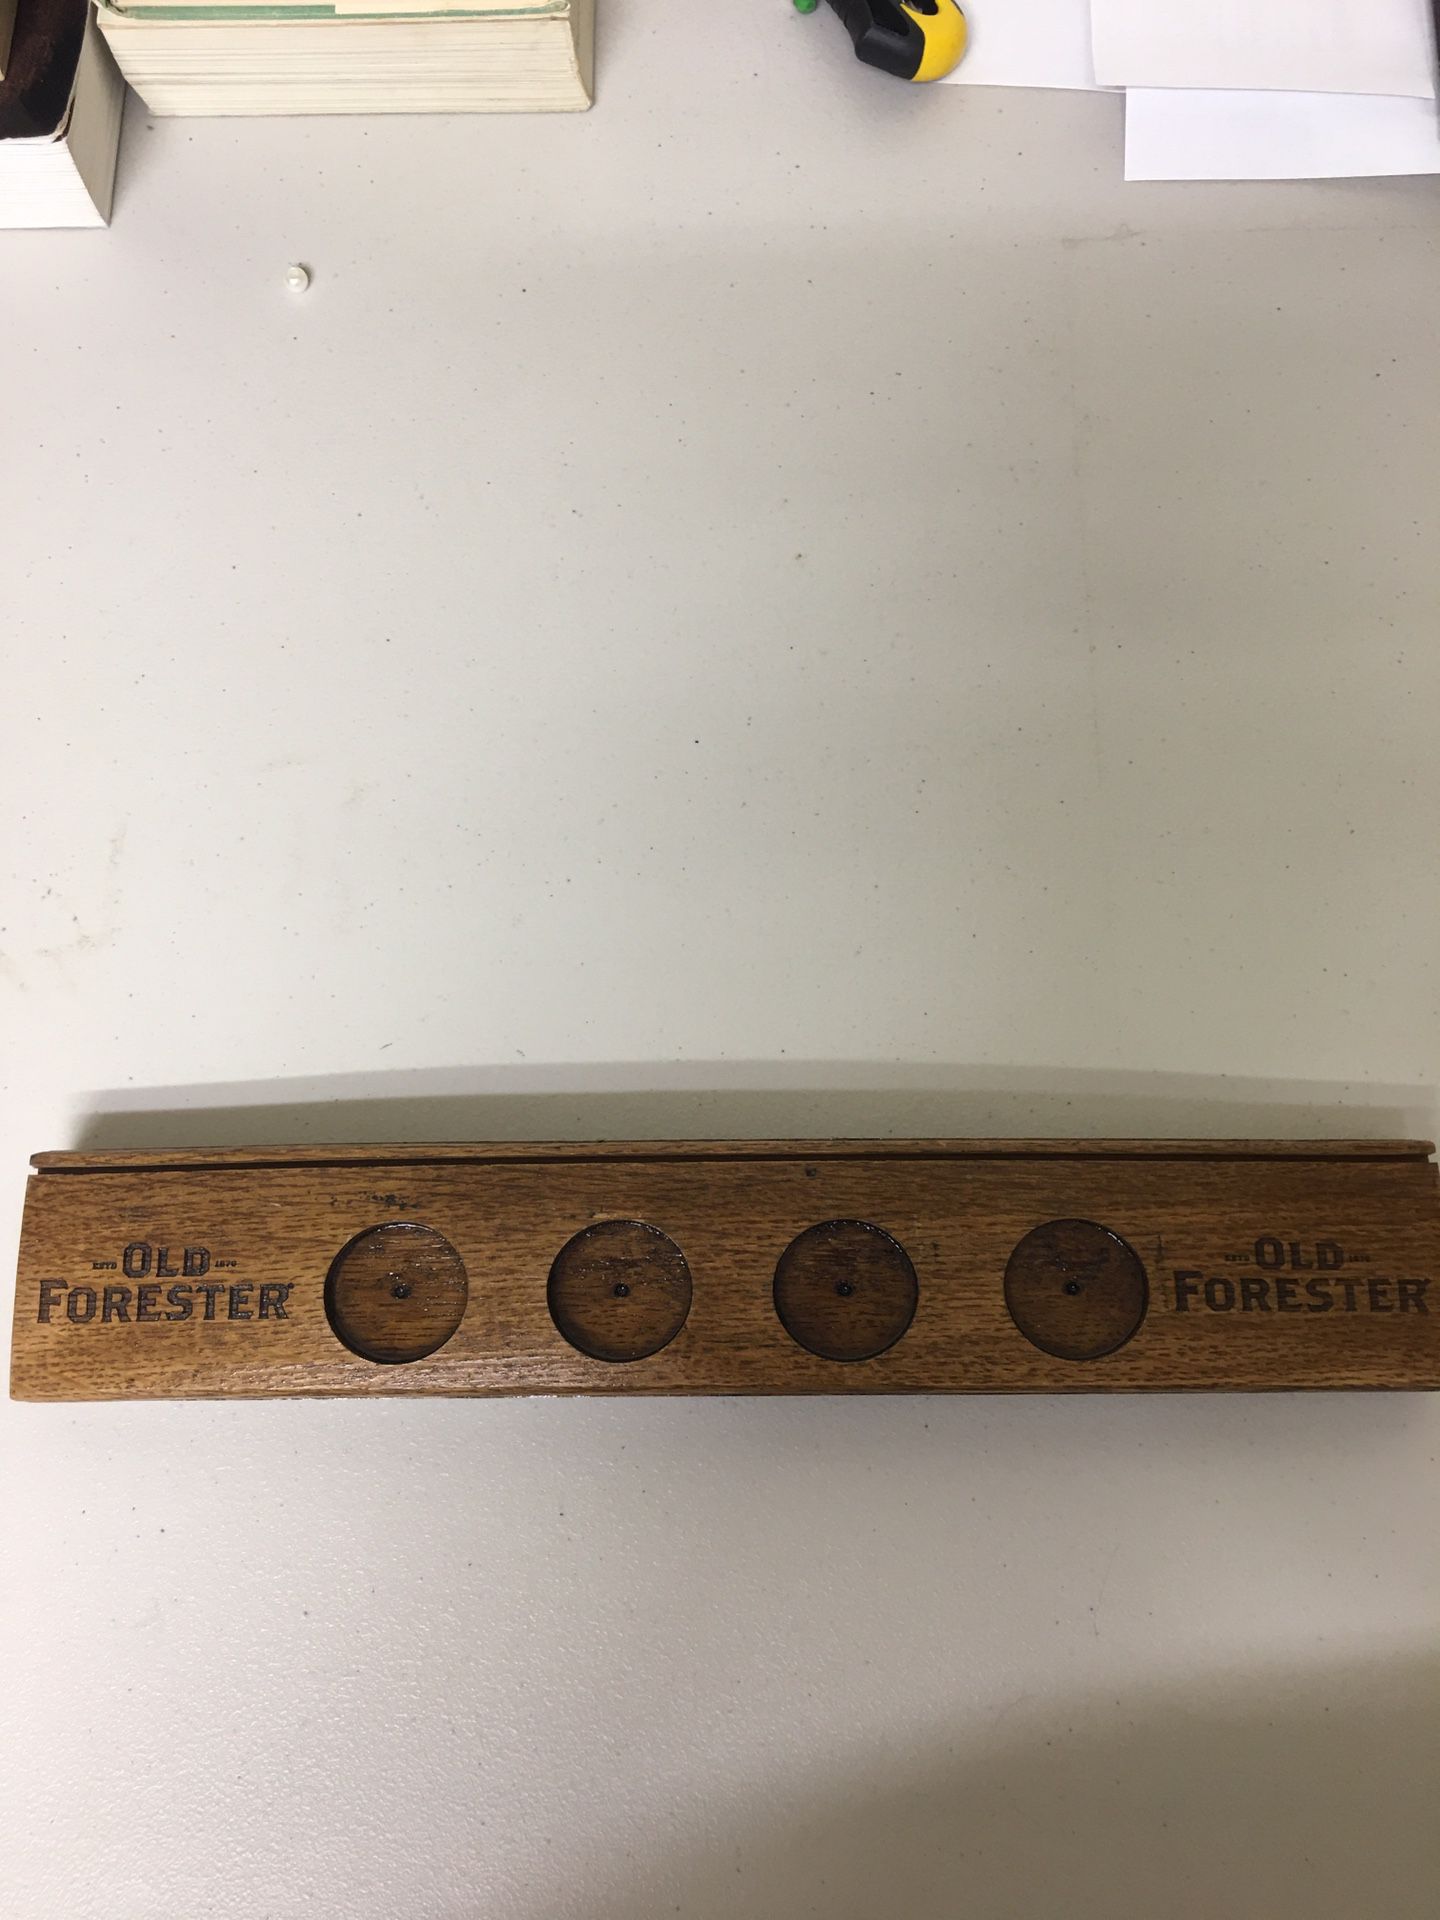 Old Forester shot glass stand